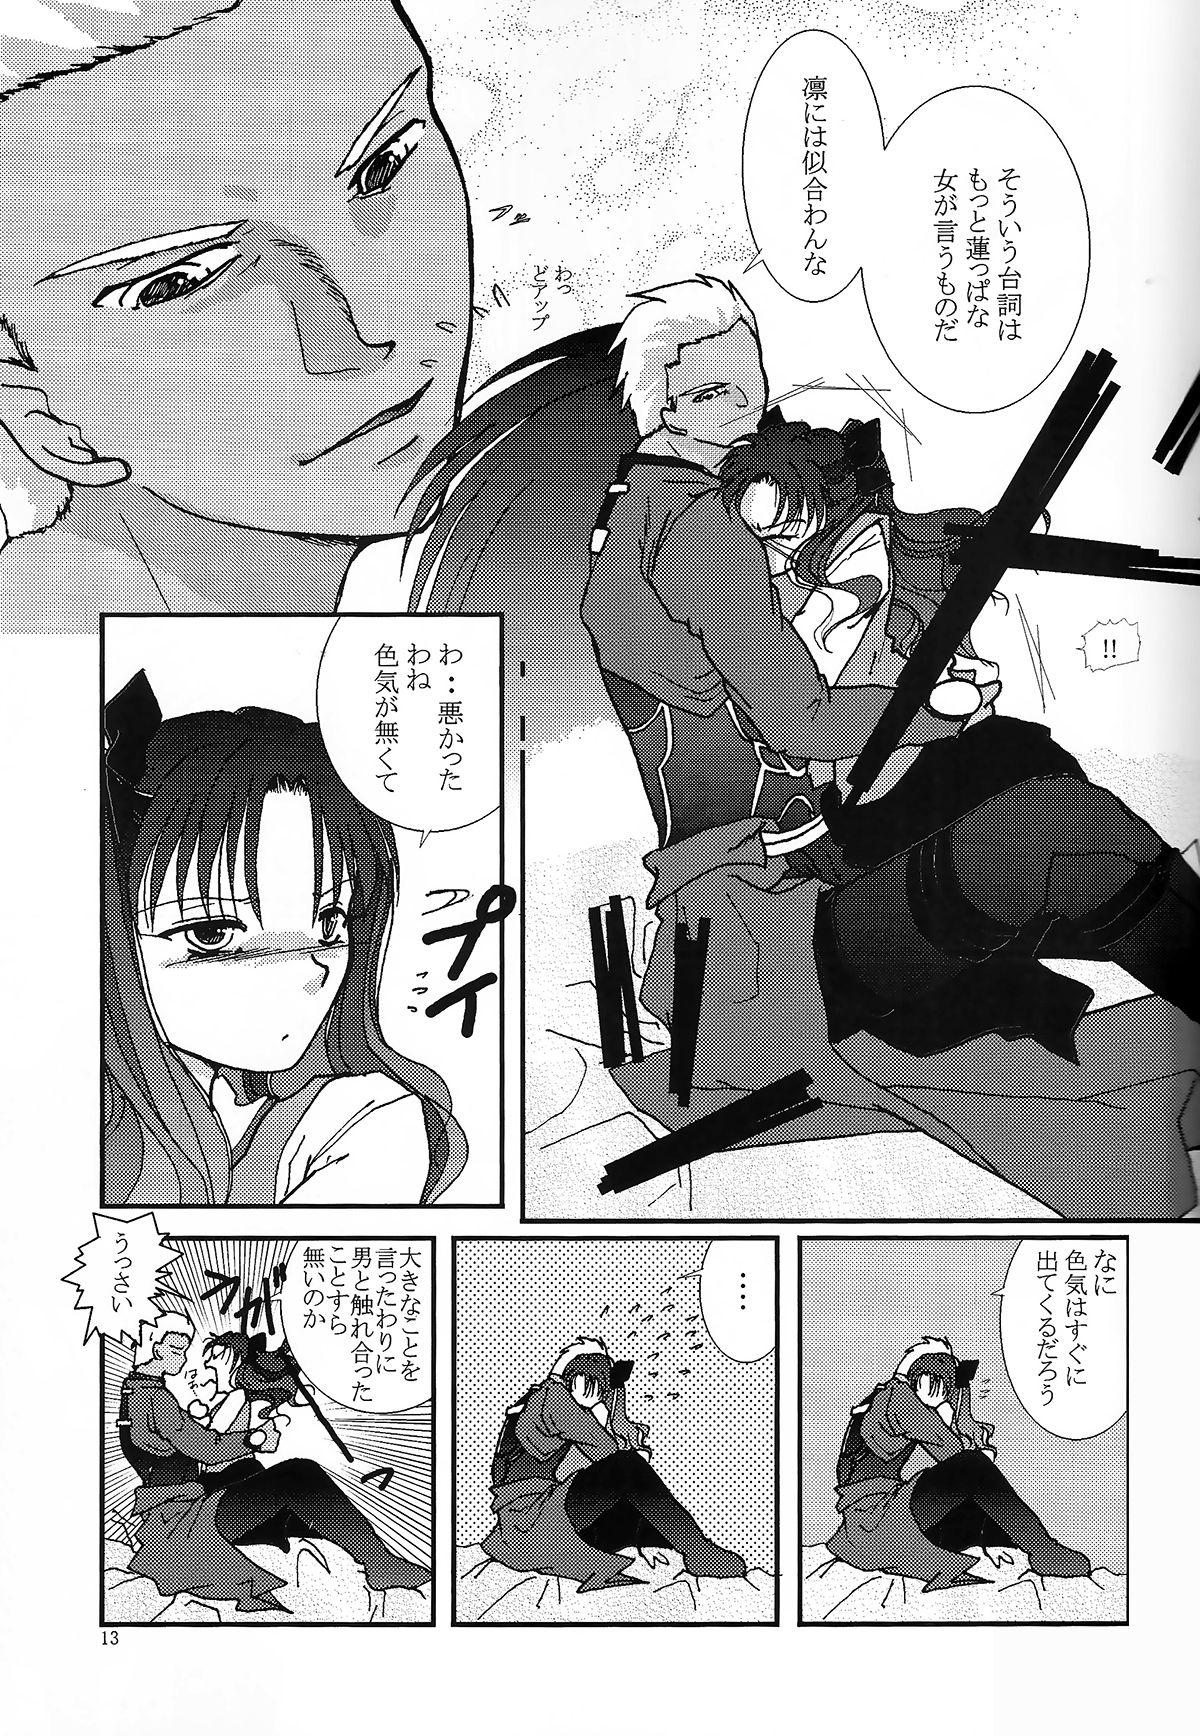 Ftvgirls Question-7 - Fate stay night Facials - Page 11